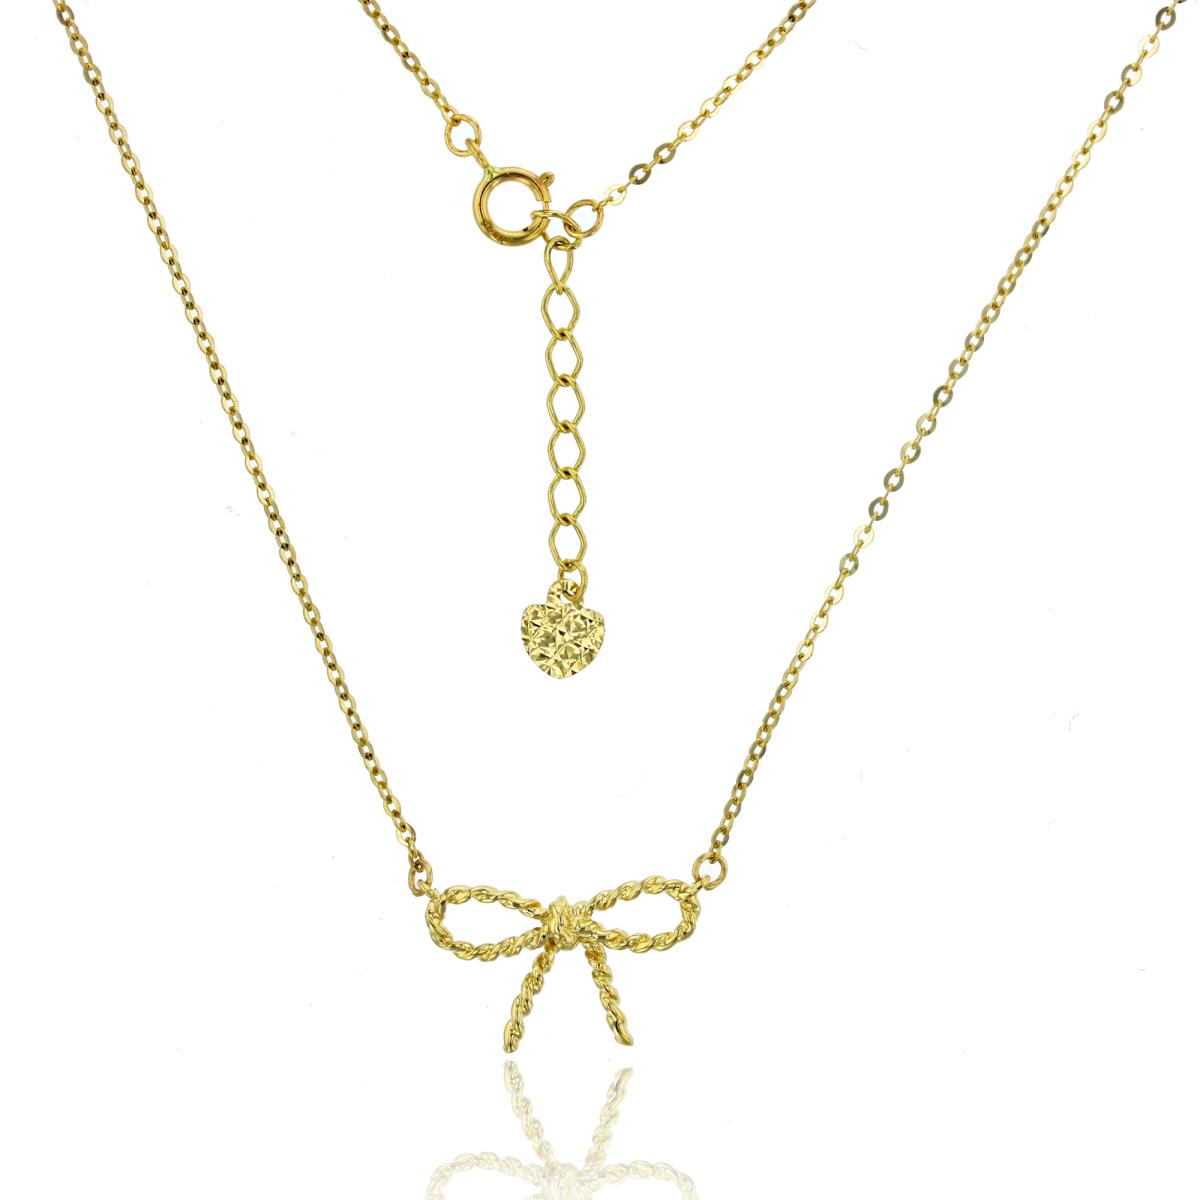 10K Yellow Gold Rope Bow 16+1" Necklace with DC Heart Plate